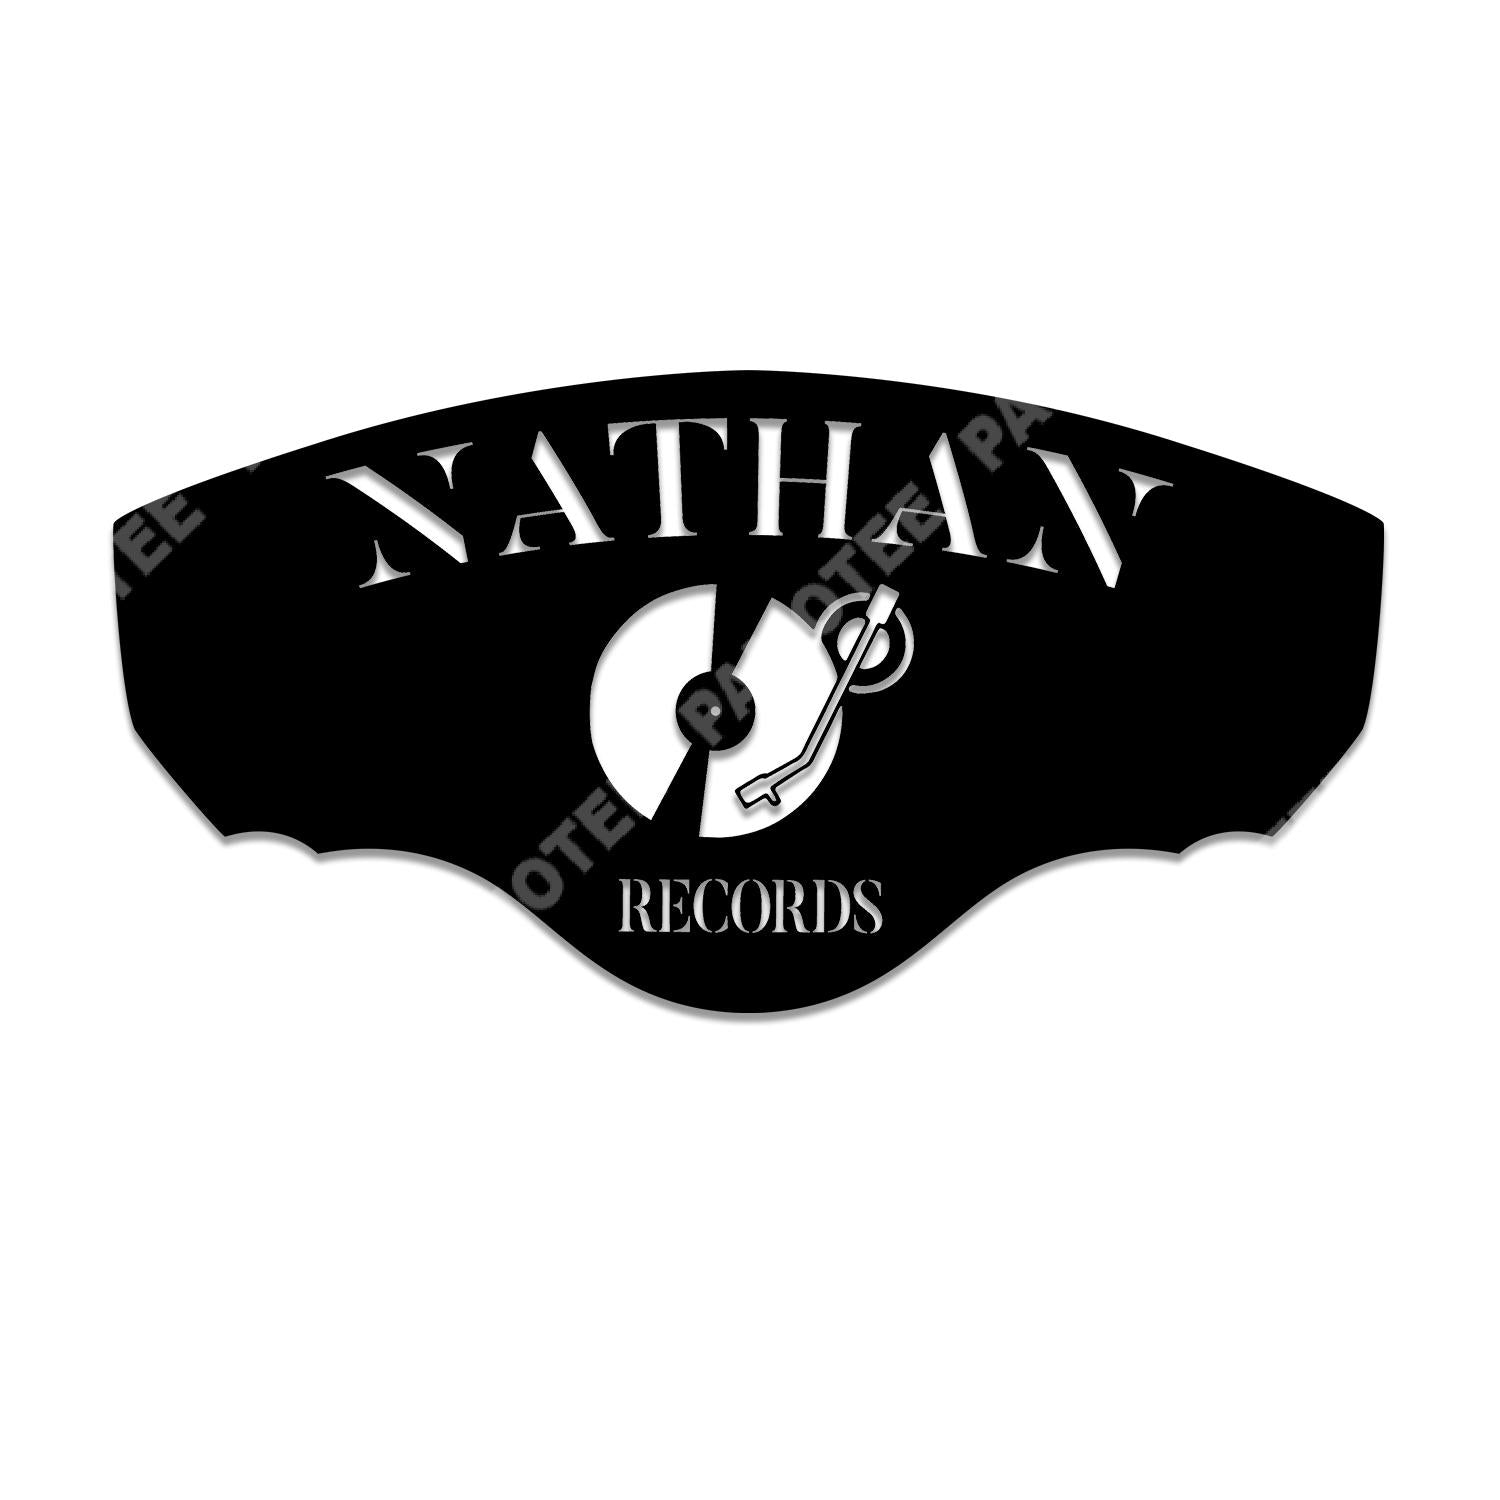 Personalized Music Record Studio Metal Sign, Gift For Music Producer